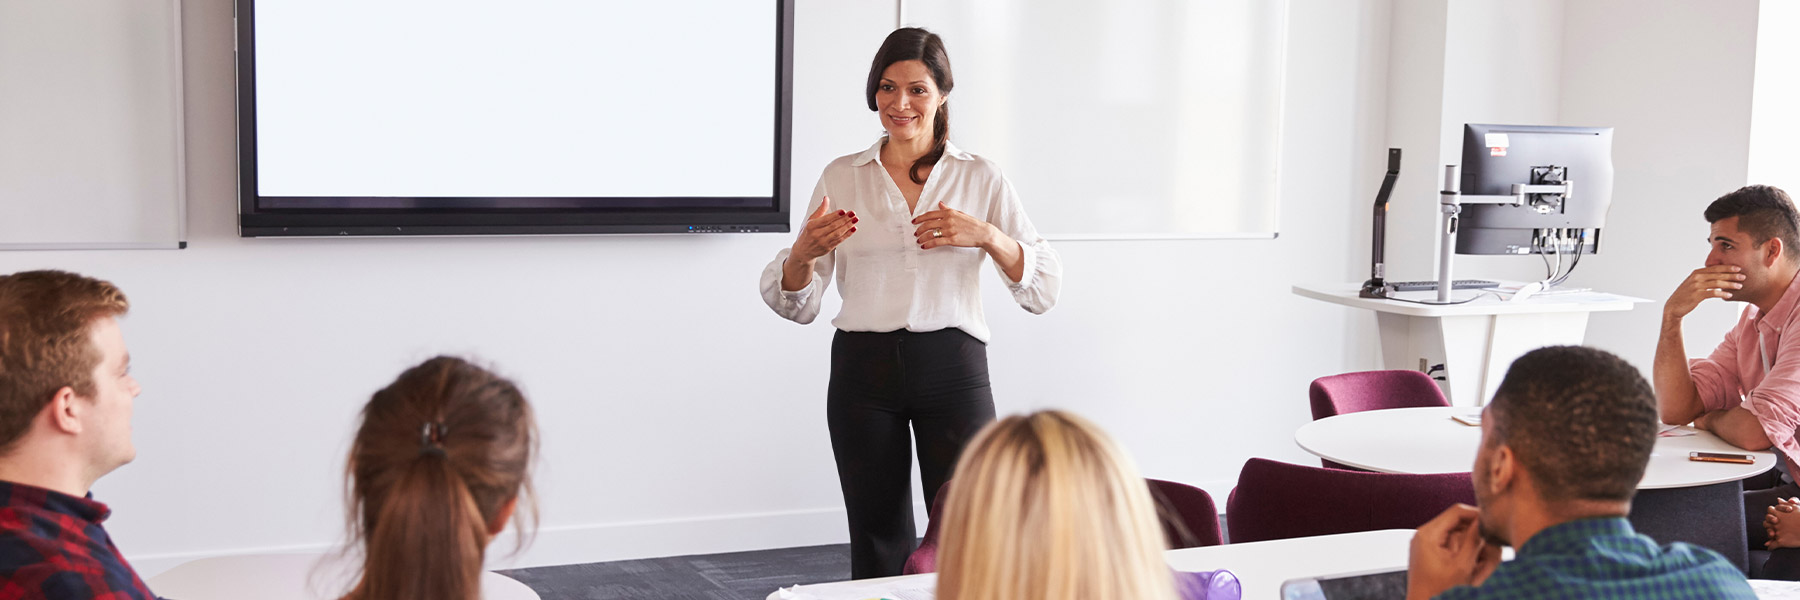 Woman standing in front of a white board talking to a group of people